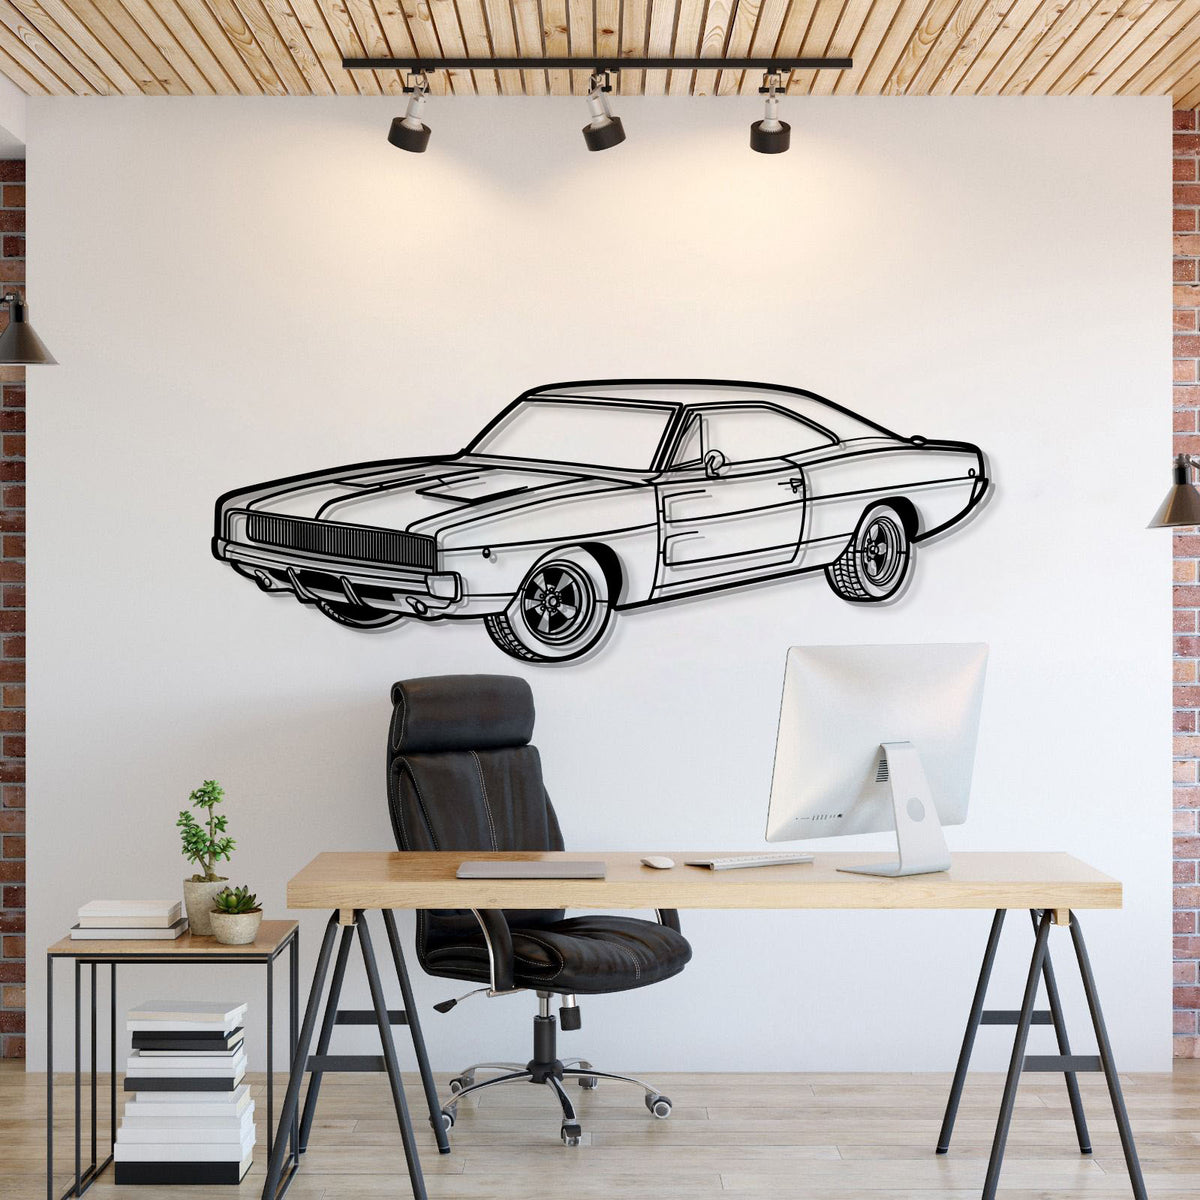 1968 Charger R-T Perspective Metal Car Wall Art - MT1259